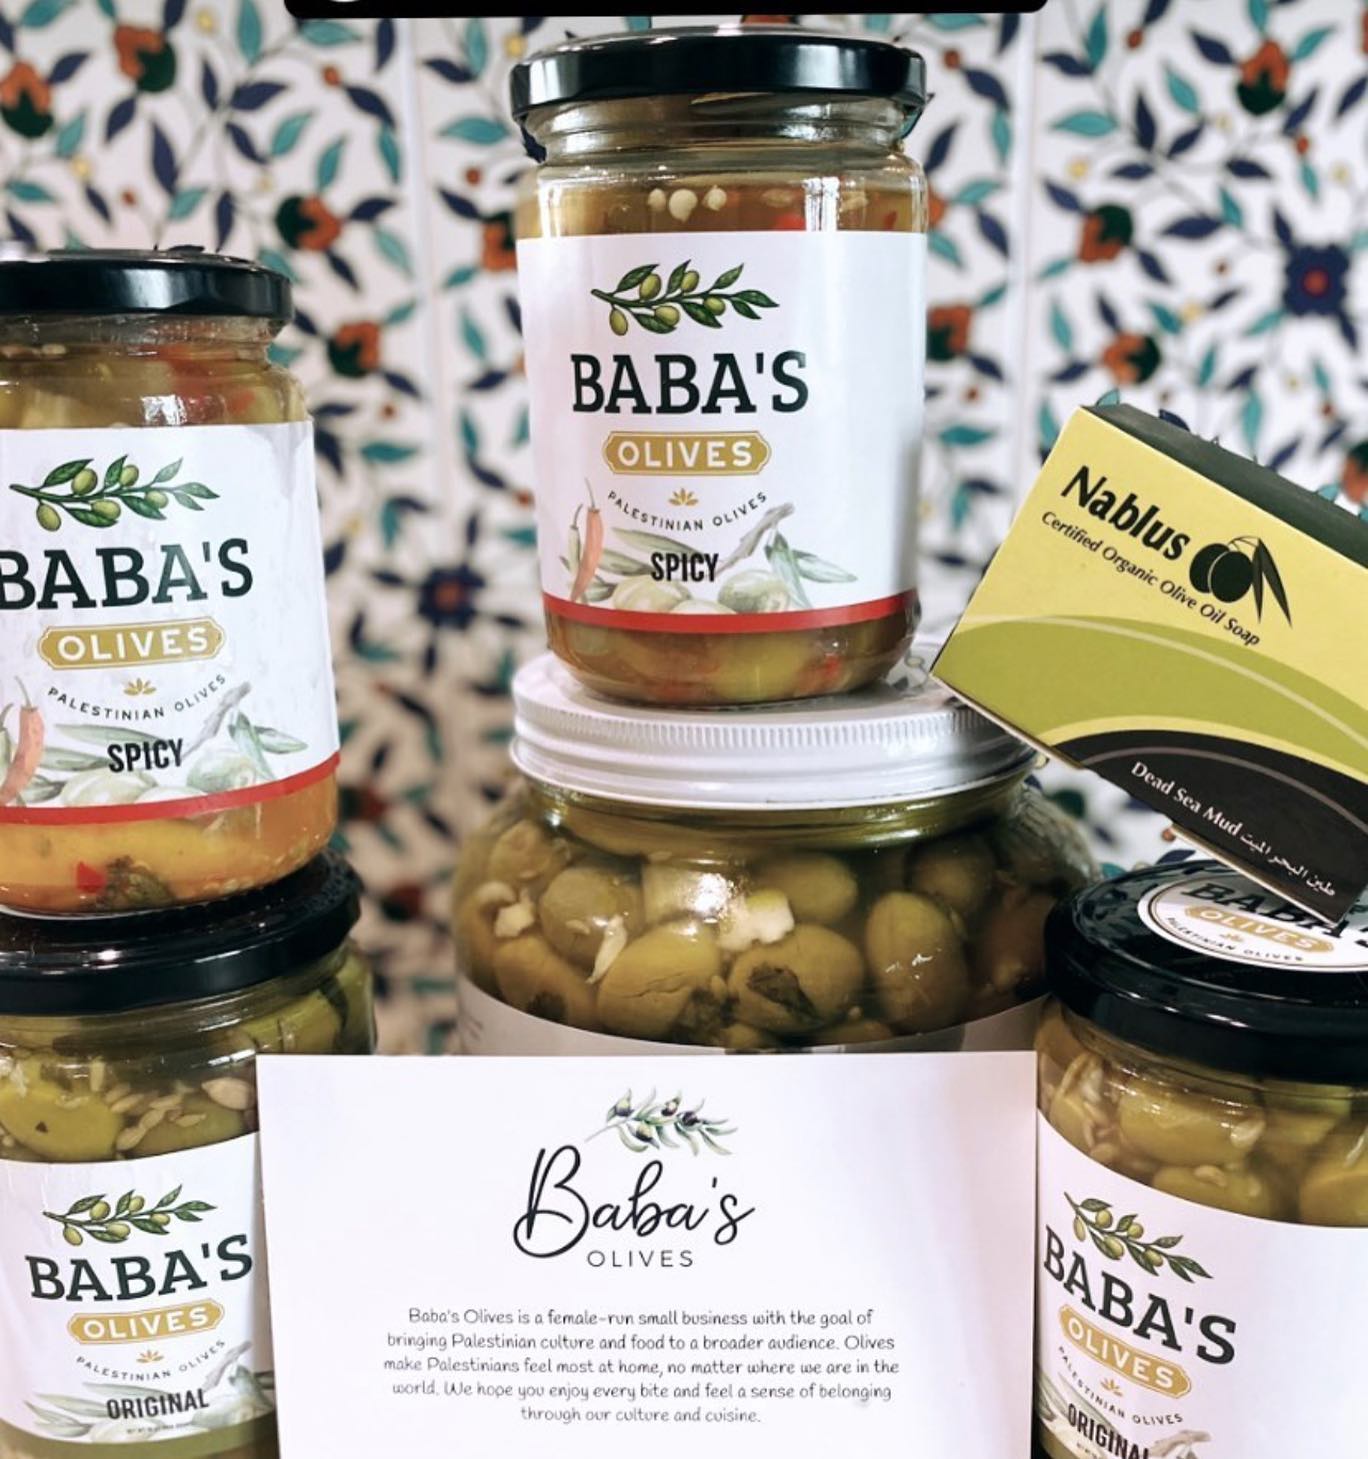 Baba's Olives - Red Hot Chili Pepper